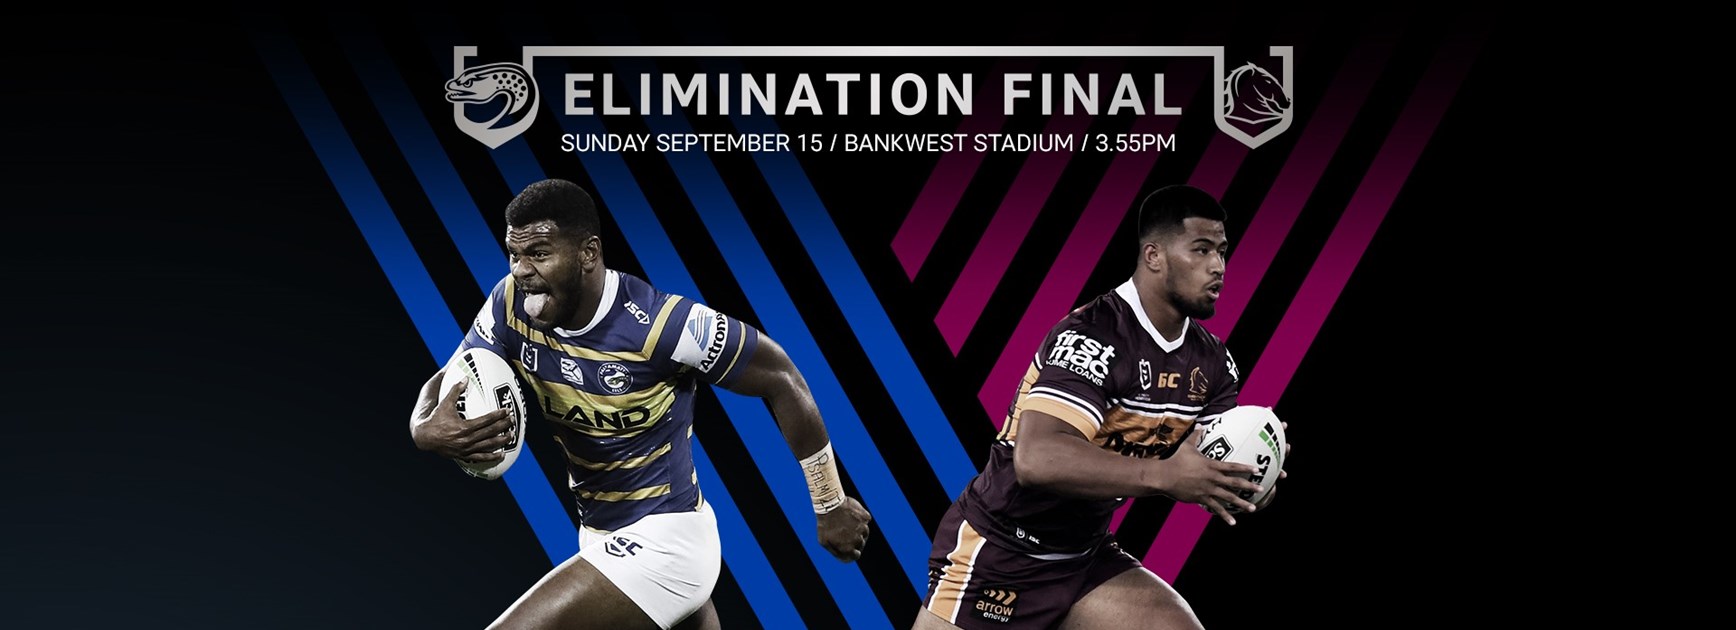 General Public Tickets to Elimination Final now on sale